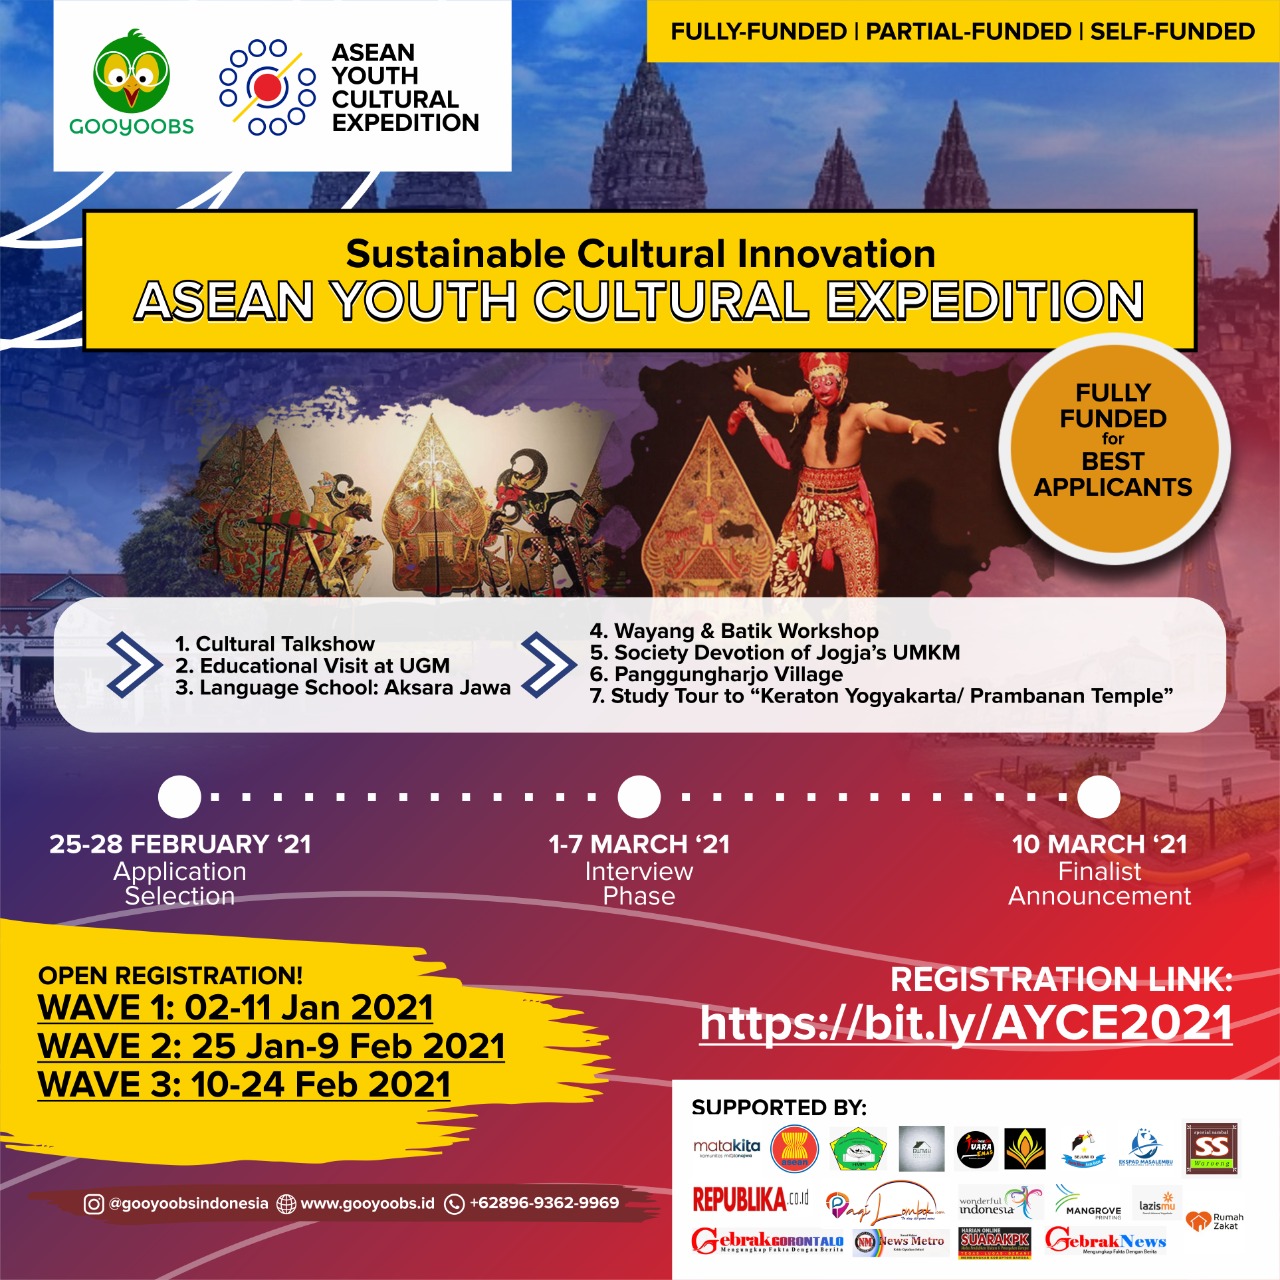 ASEAN Youth Cultural Expedition 2021